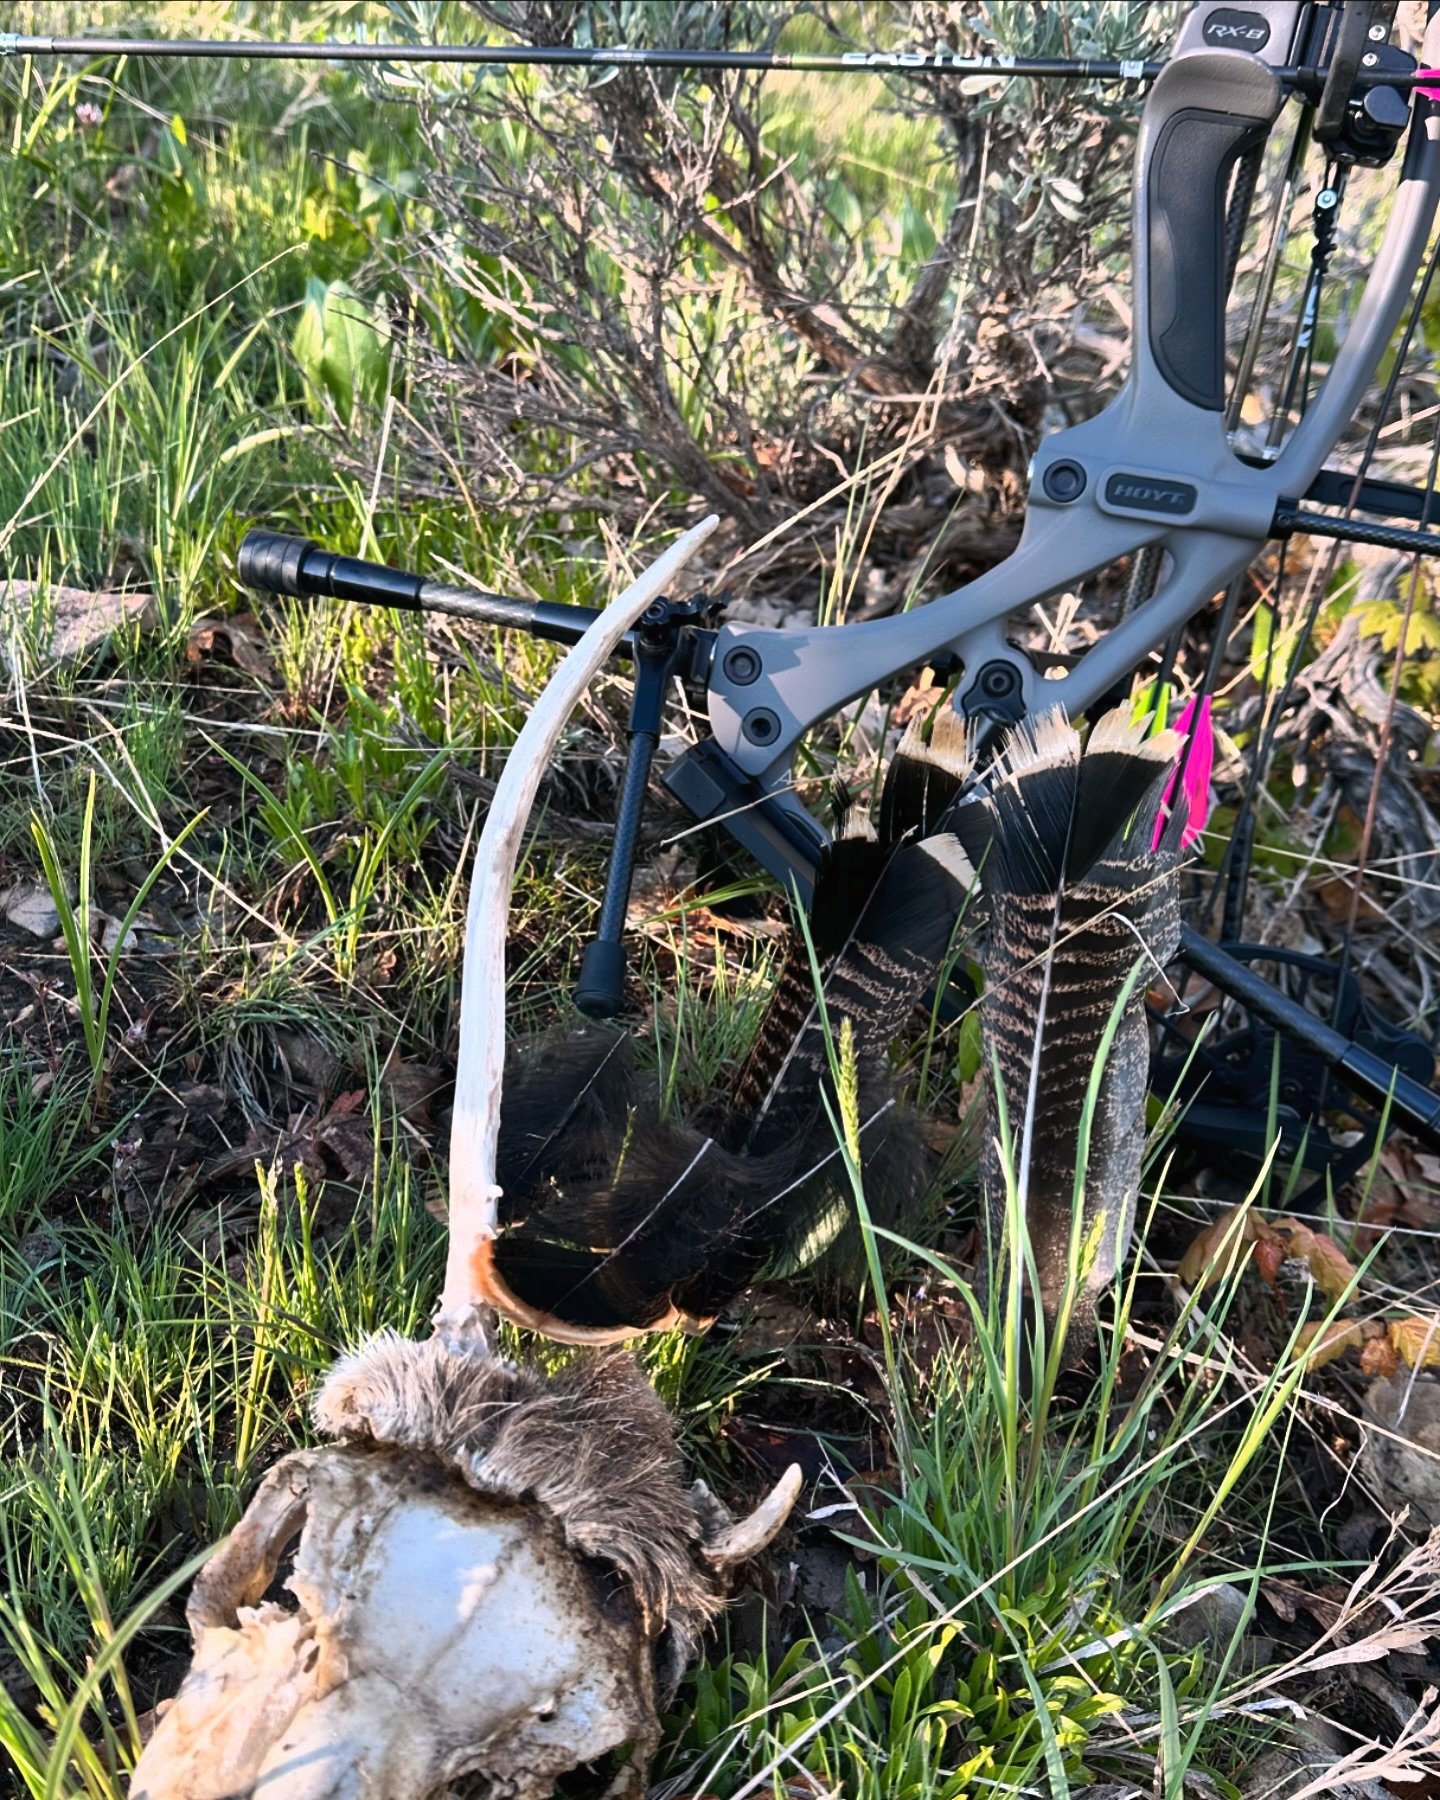 Consolation prize for taking 3 feathers off&hellip;. Runnin and gunnin turkeys is fun!!!! Gives you practical experience, and everyday you are in the woods with your bow can give you valuable lessons preparing you for elk season. This weeks lesson&he